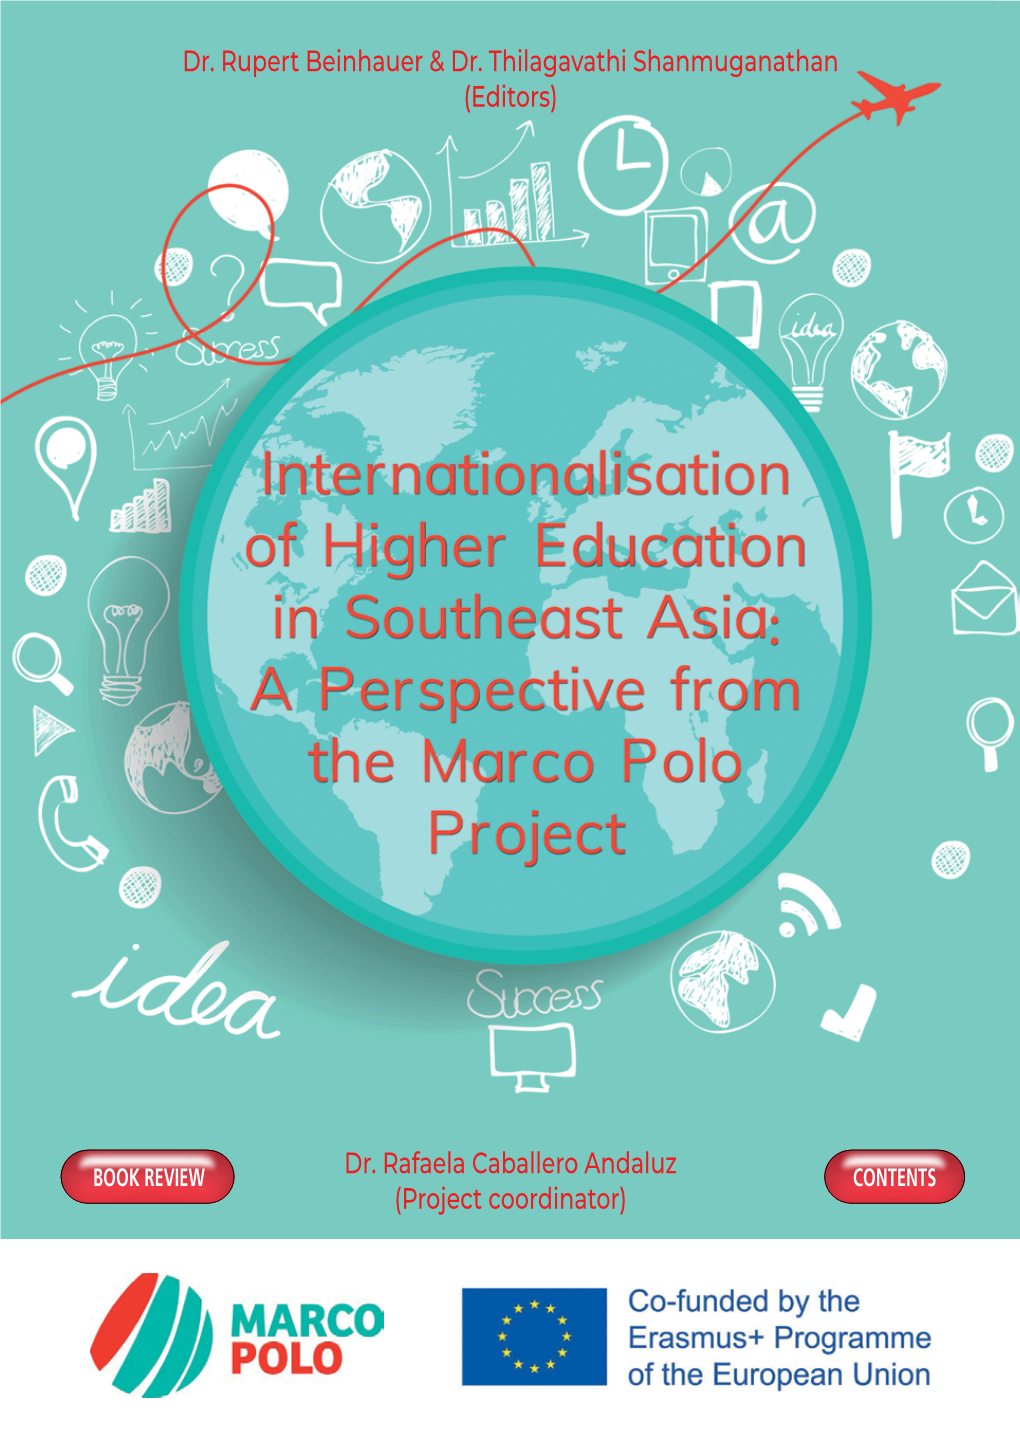 Internationalisation of Higher Education in Southeast Asia